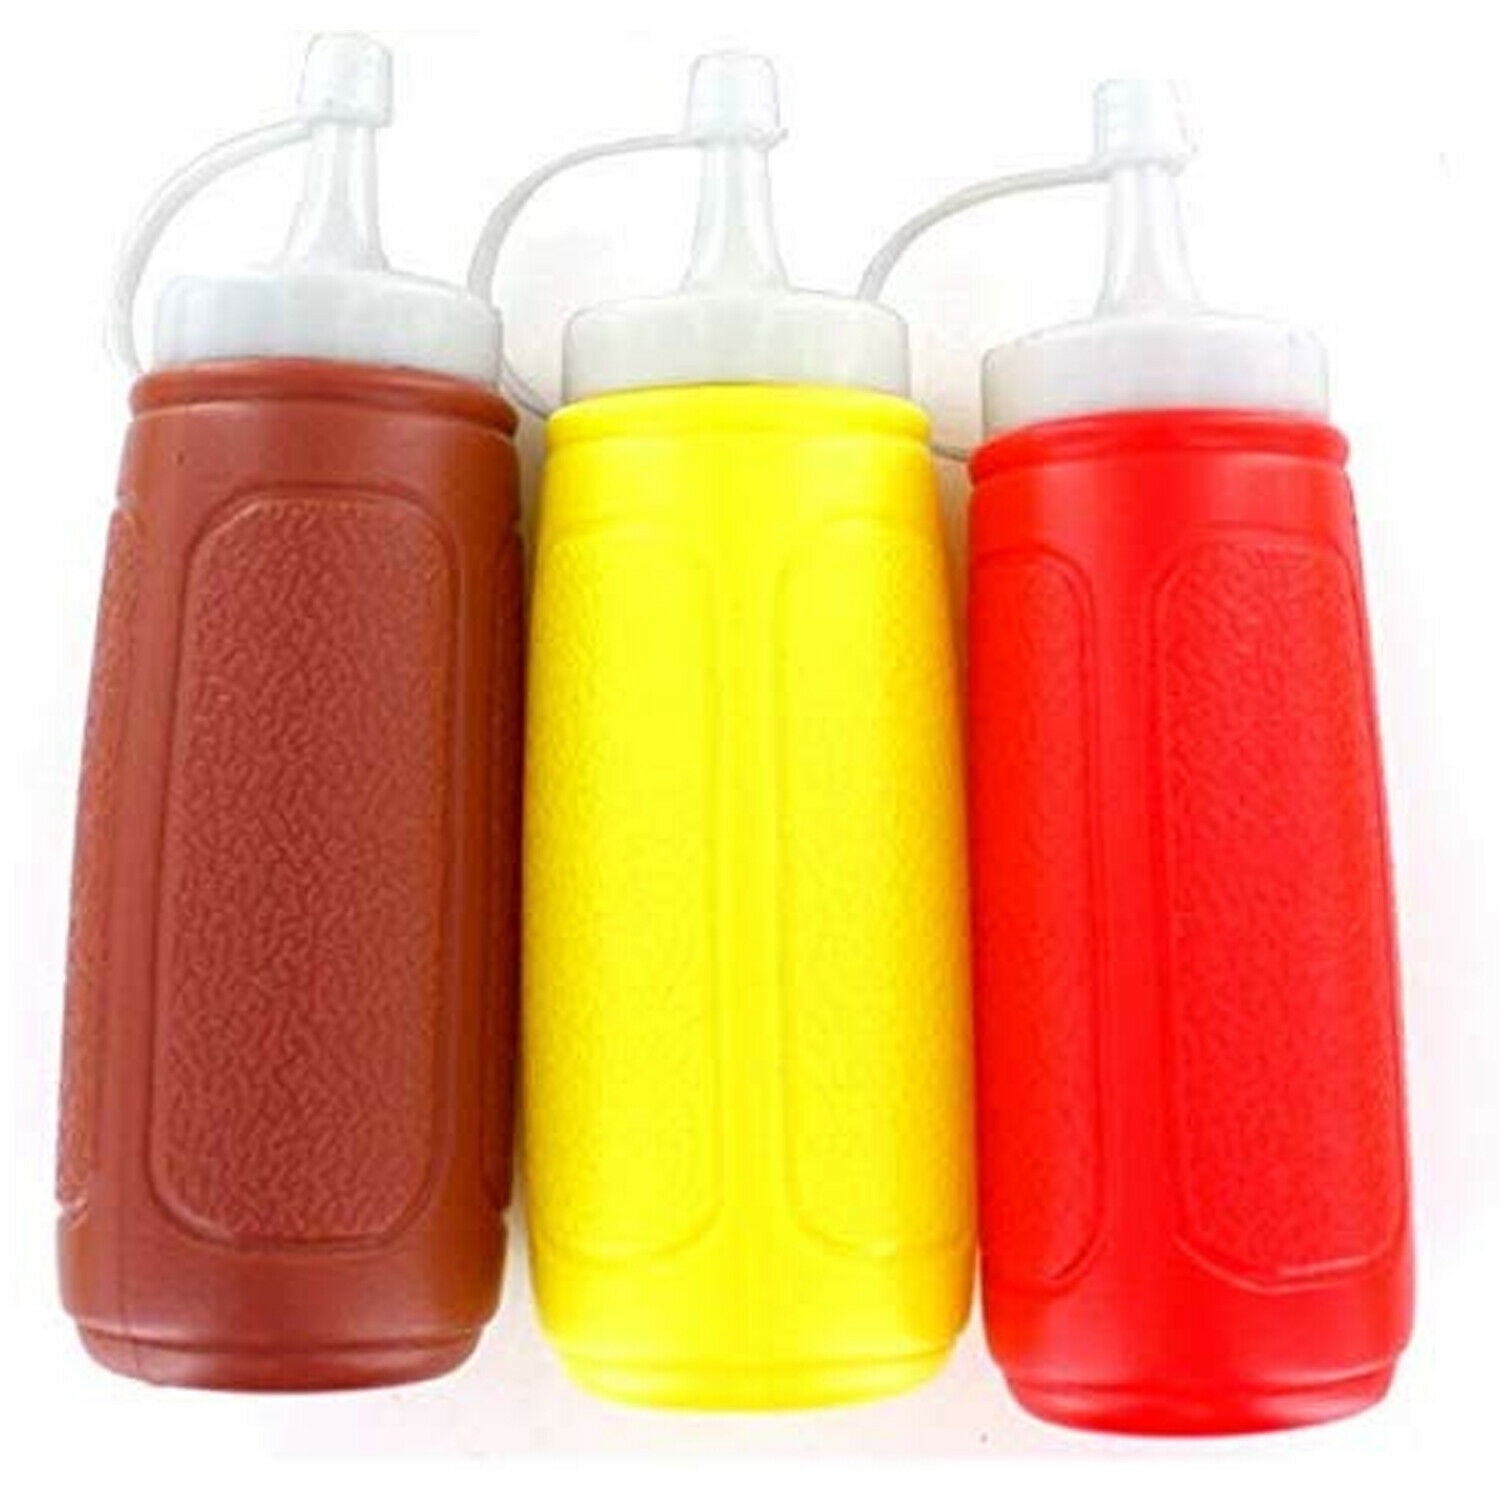 Mustard Dispensers Barbecue & Party Plastic 3pc Squeeze Sauce Bottles Ketchup 